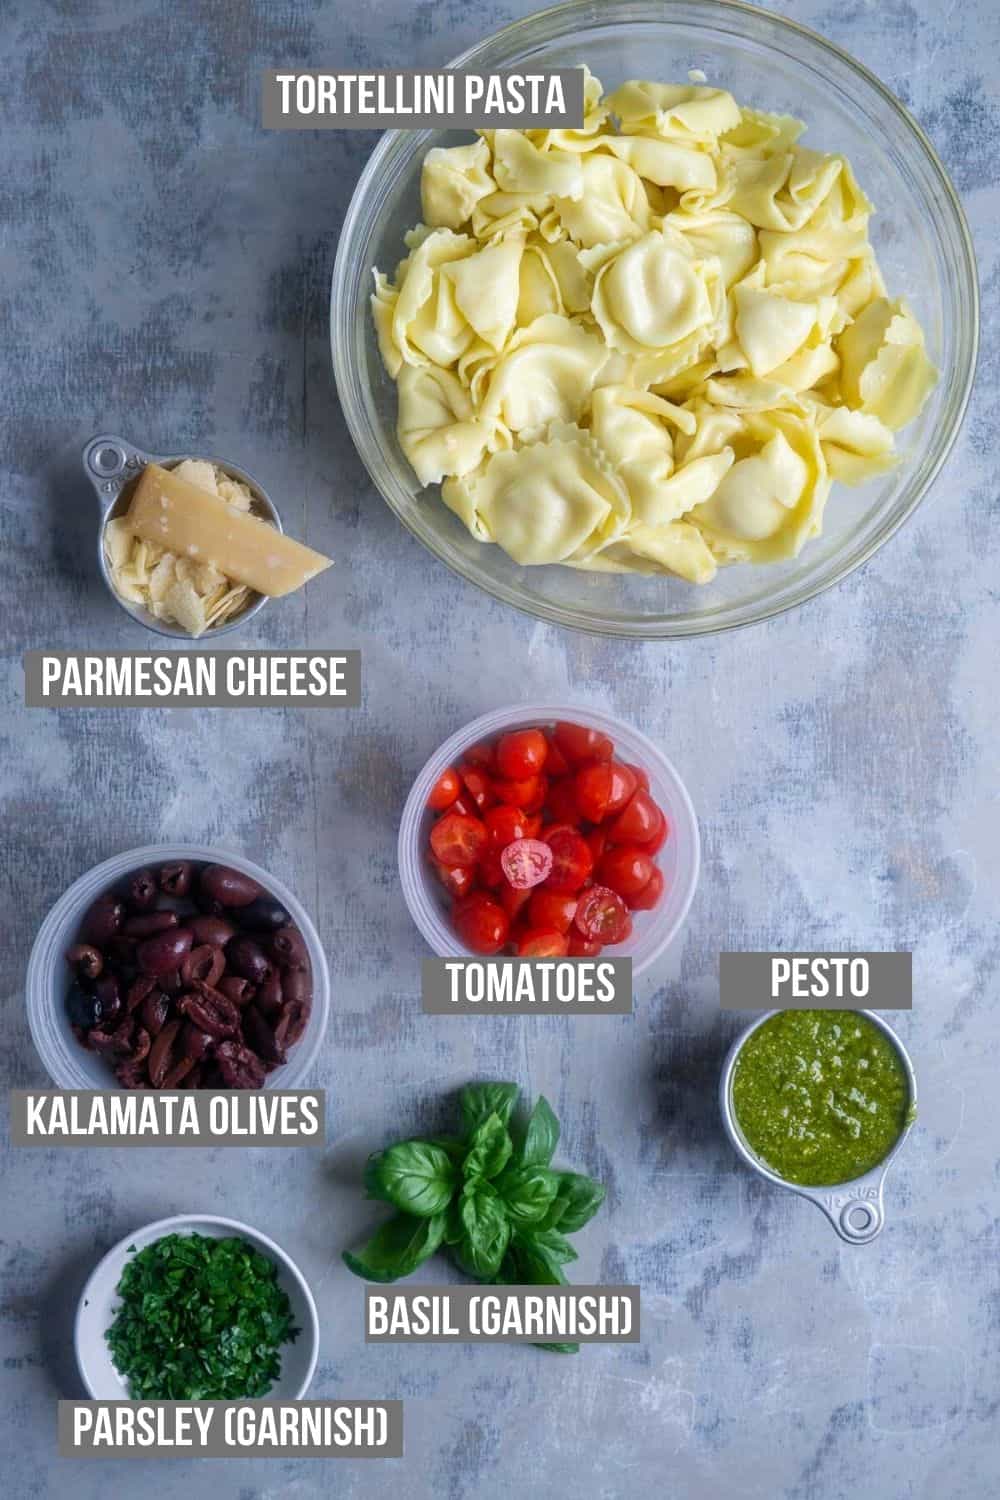 pesto tortellini pasta salad ingredients measured into bowls and ready to use